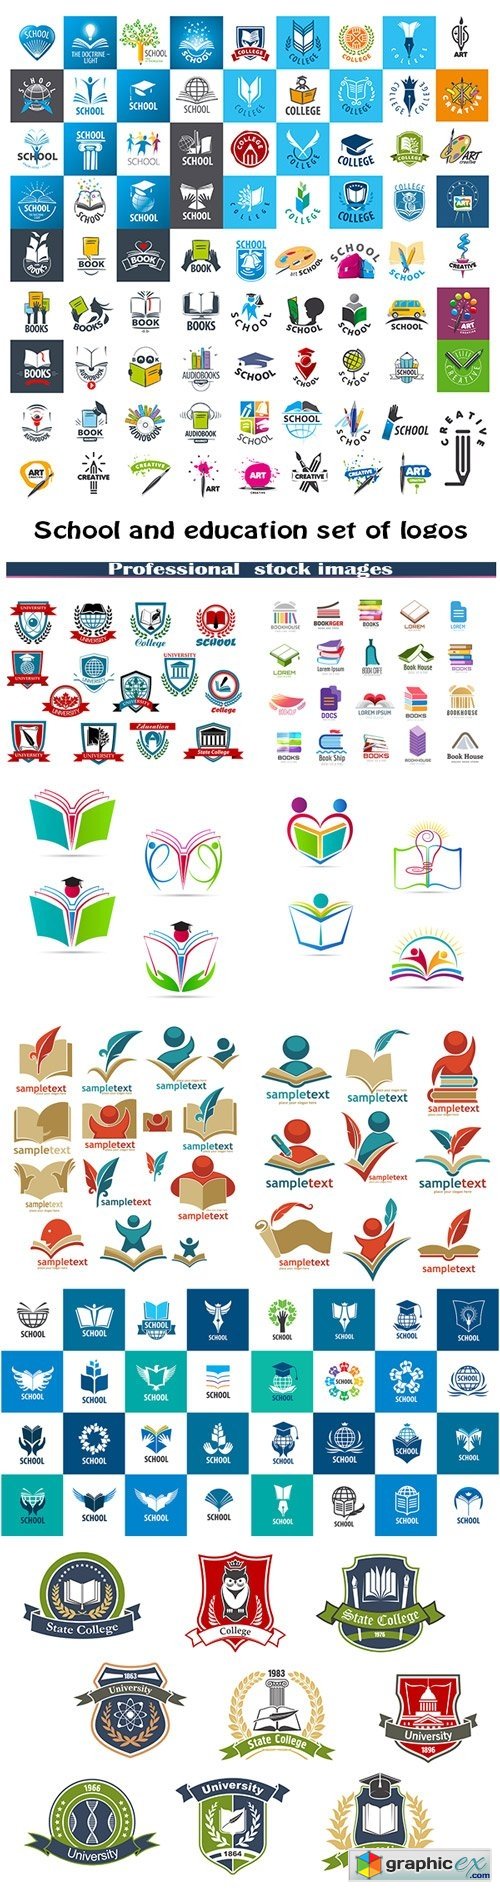 School and education set of logos